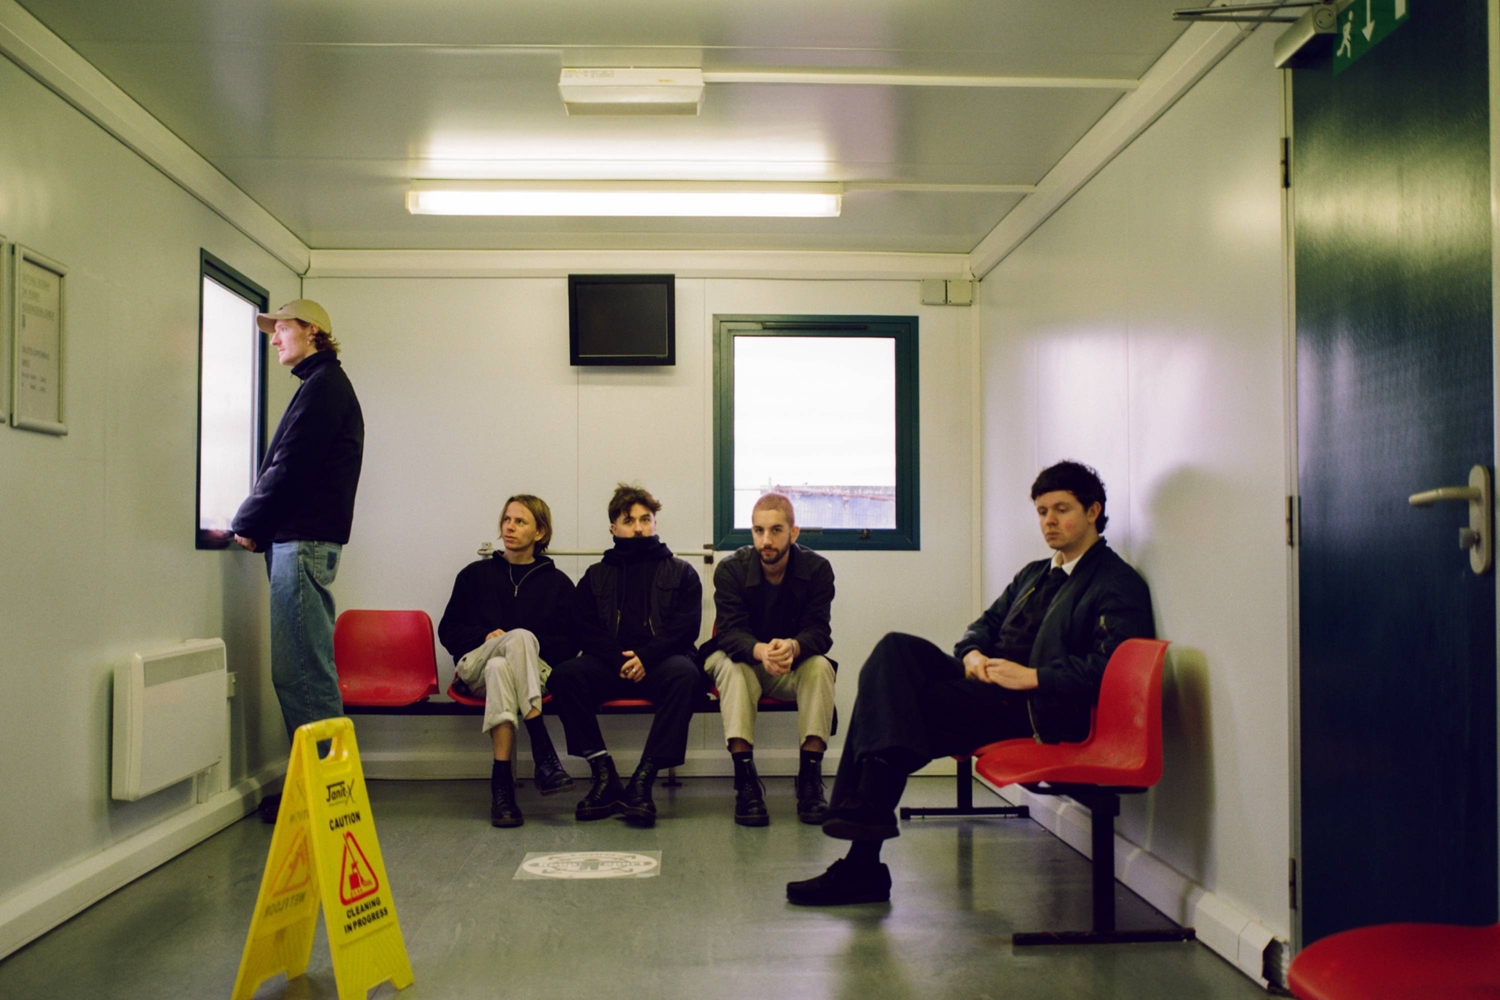 Humour release new single ‘The Halfwit’